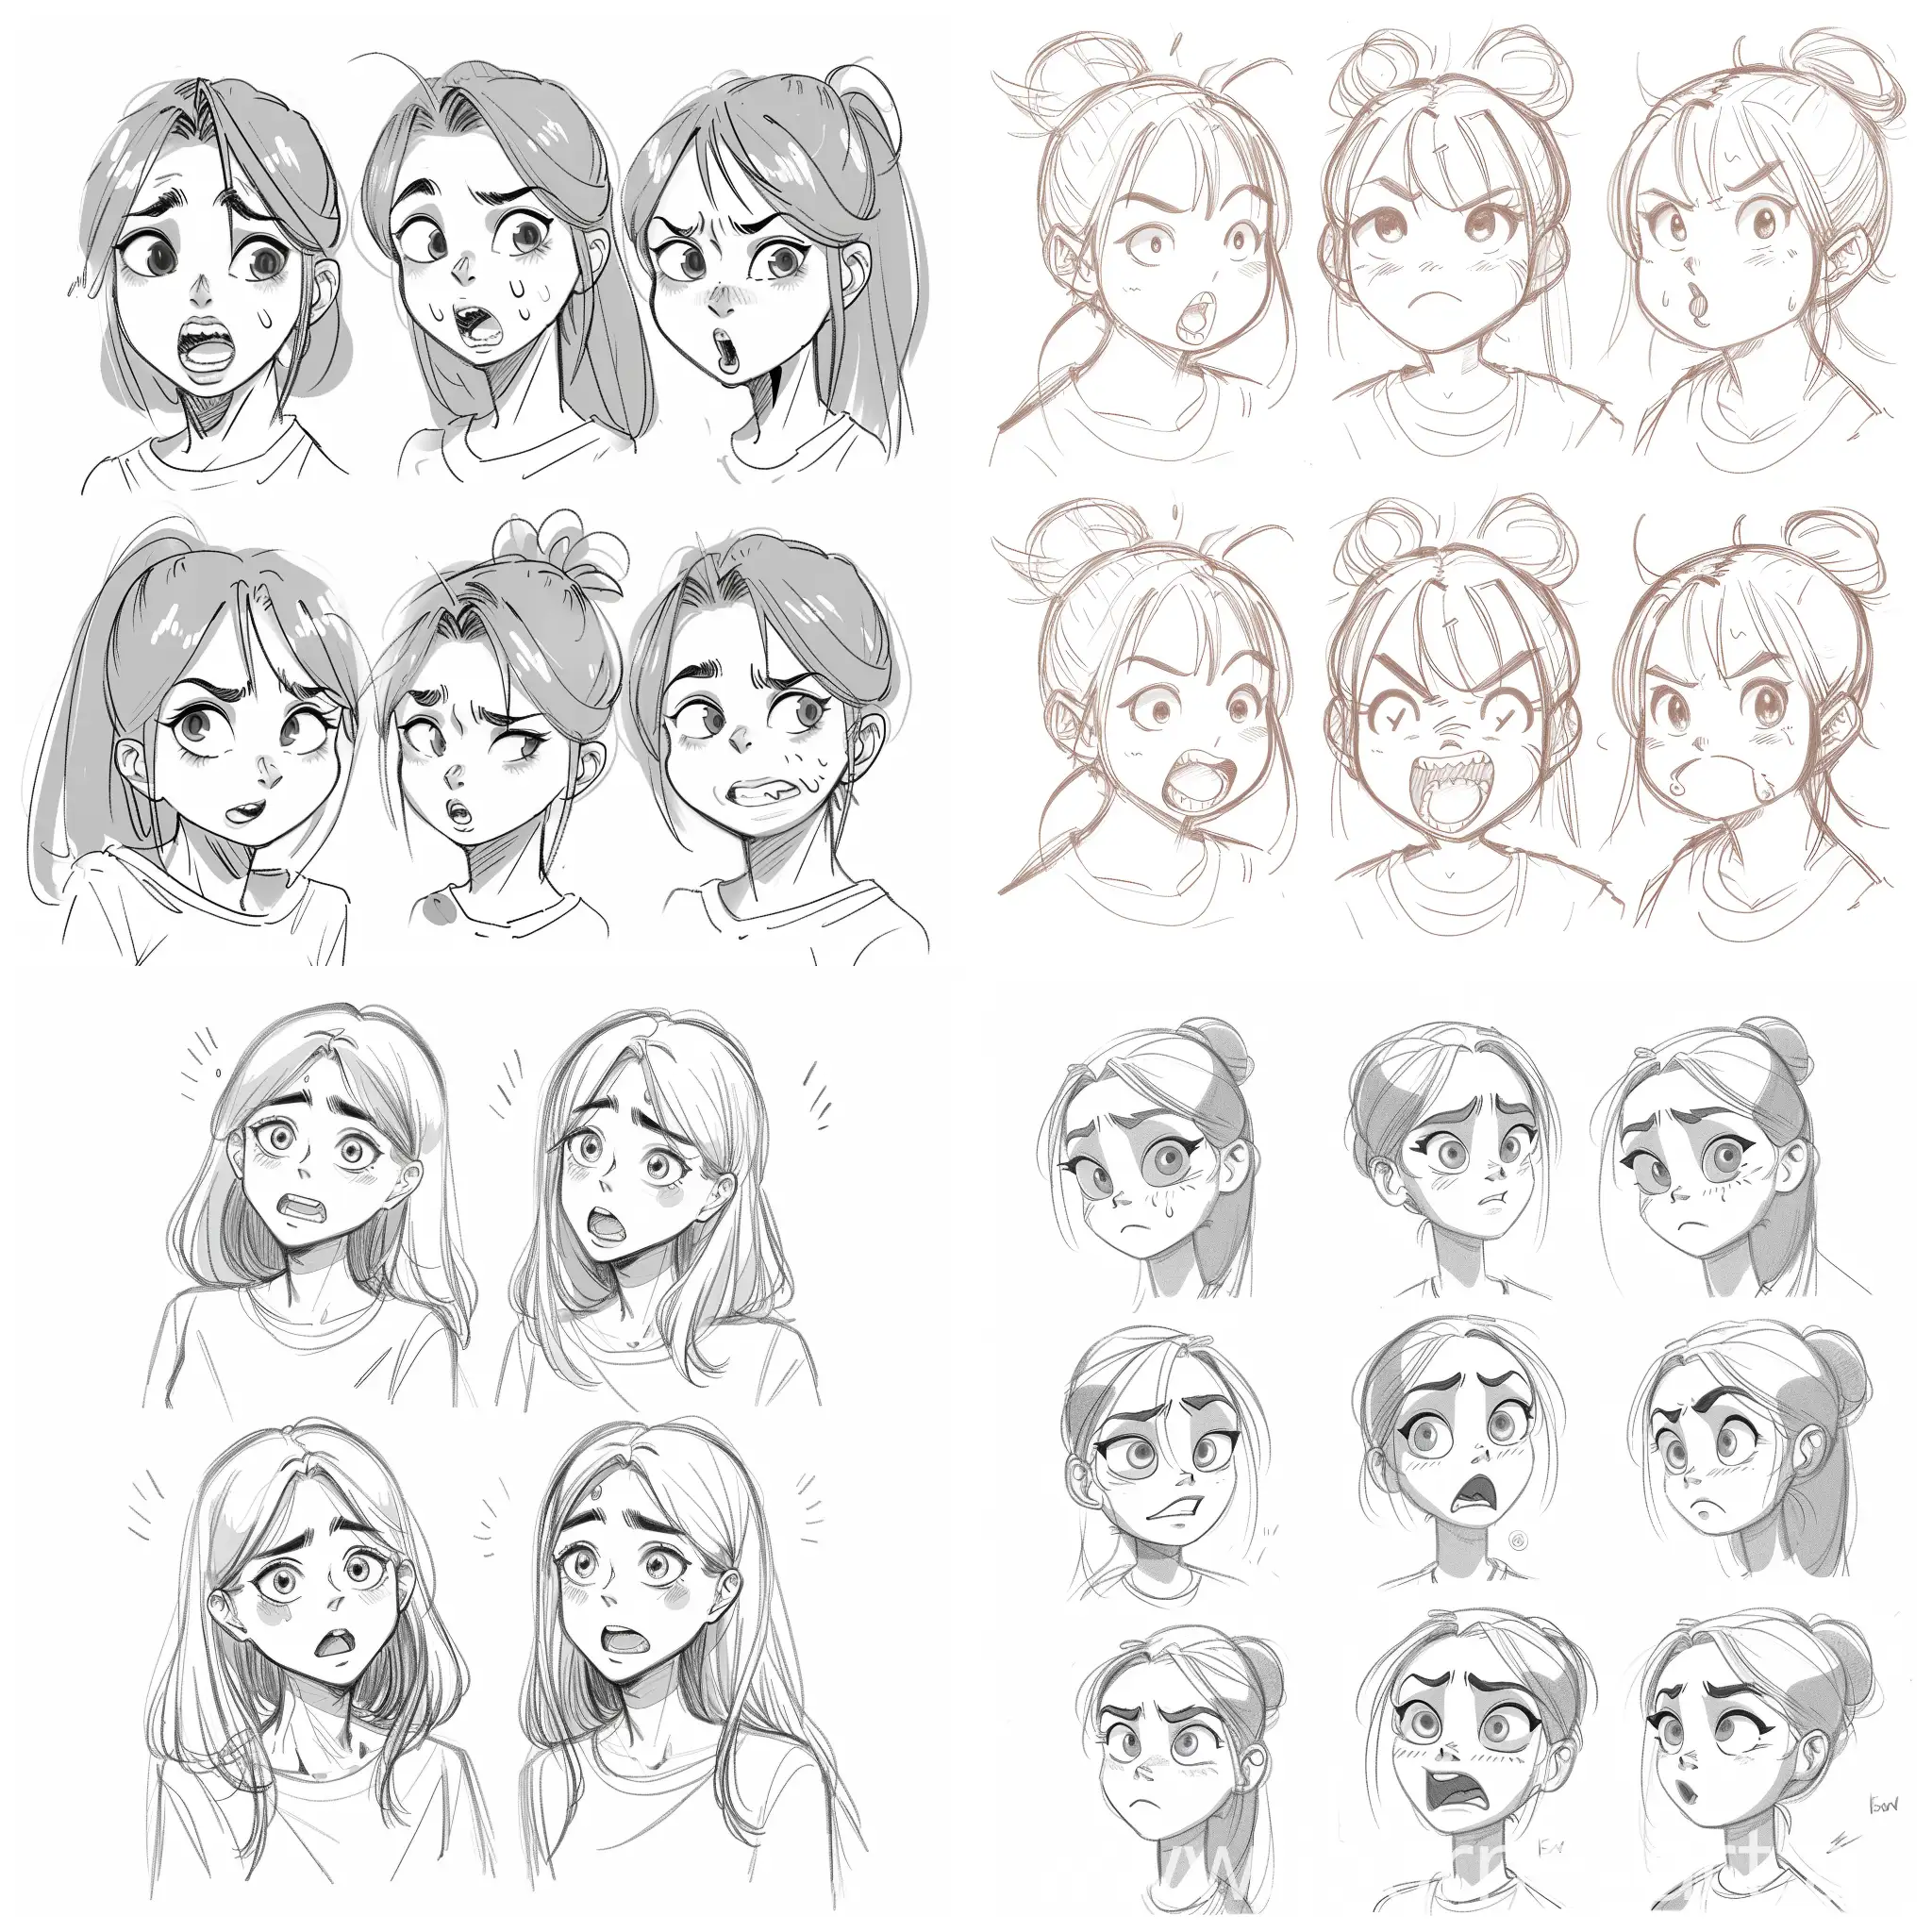 Sketch of a female anime character doing different facial expressions, cute, big eyebrows